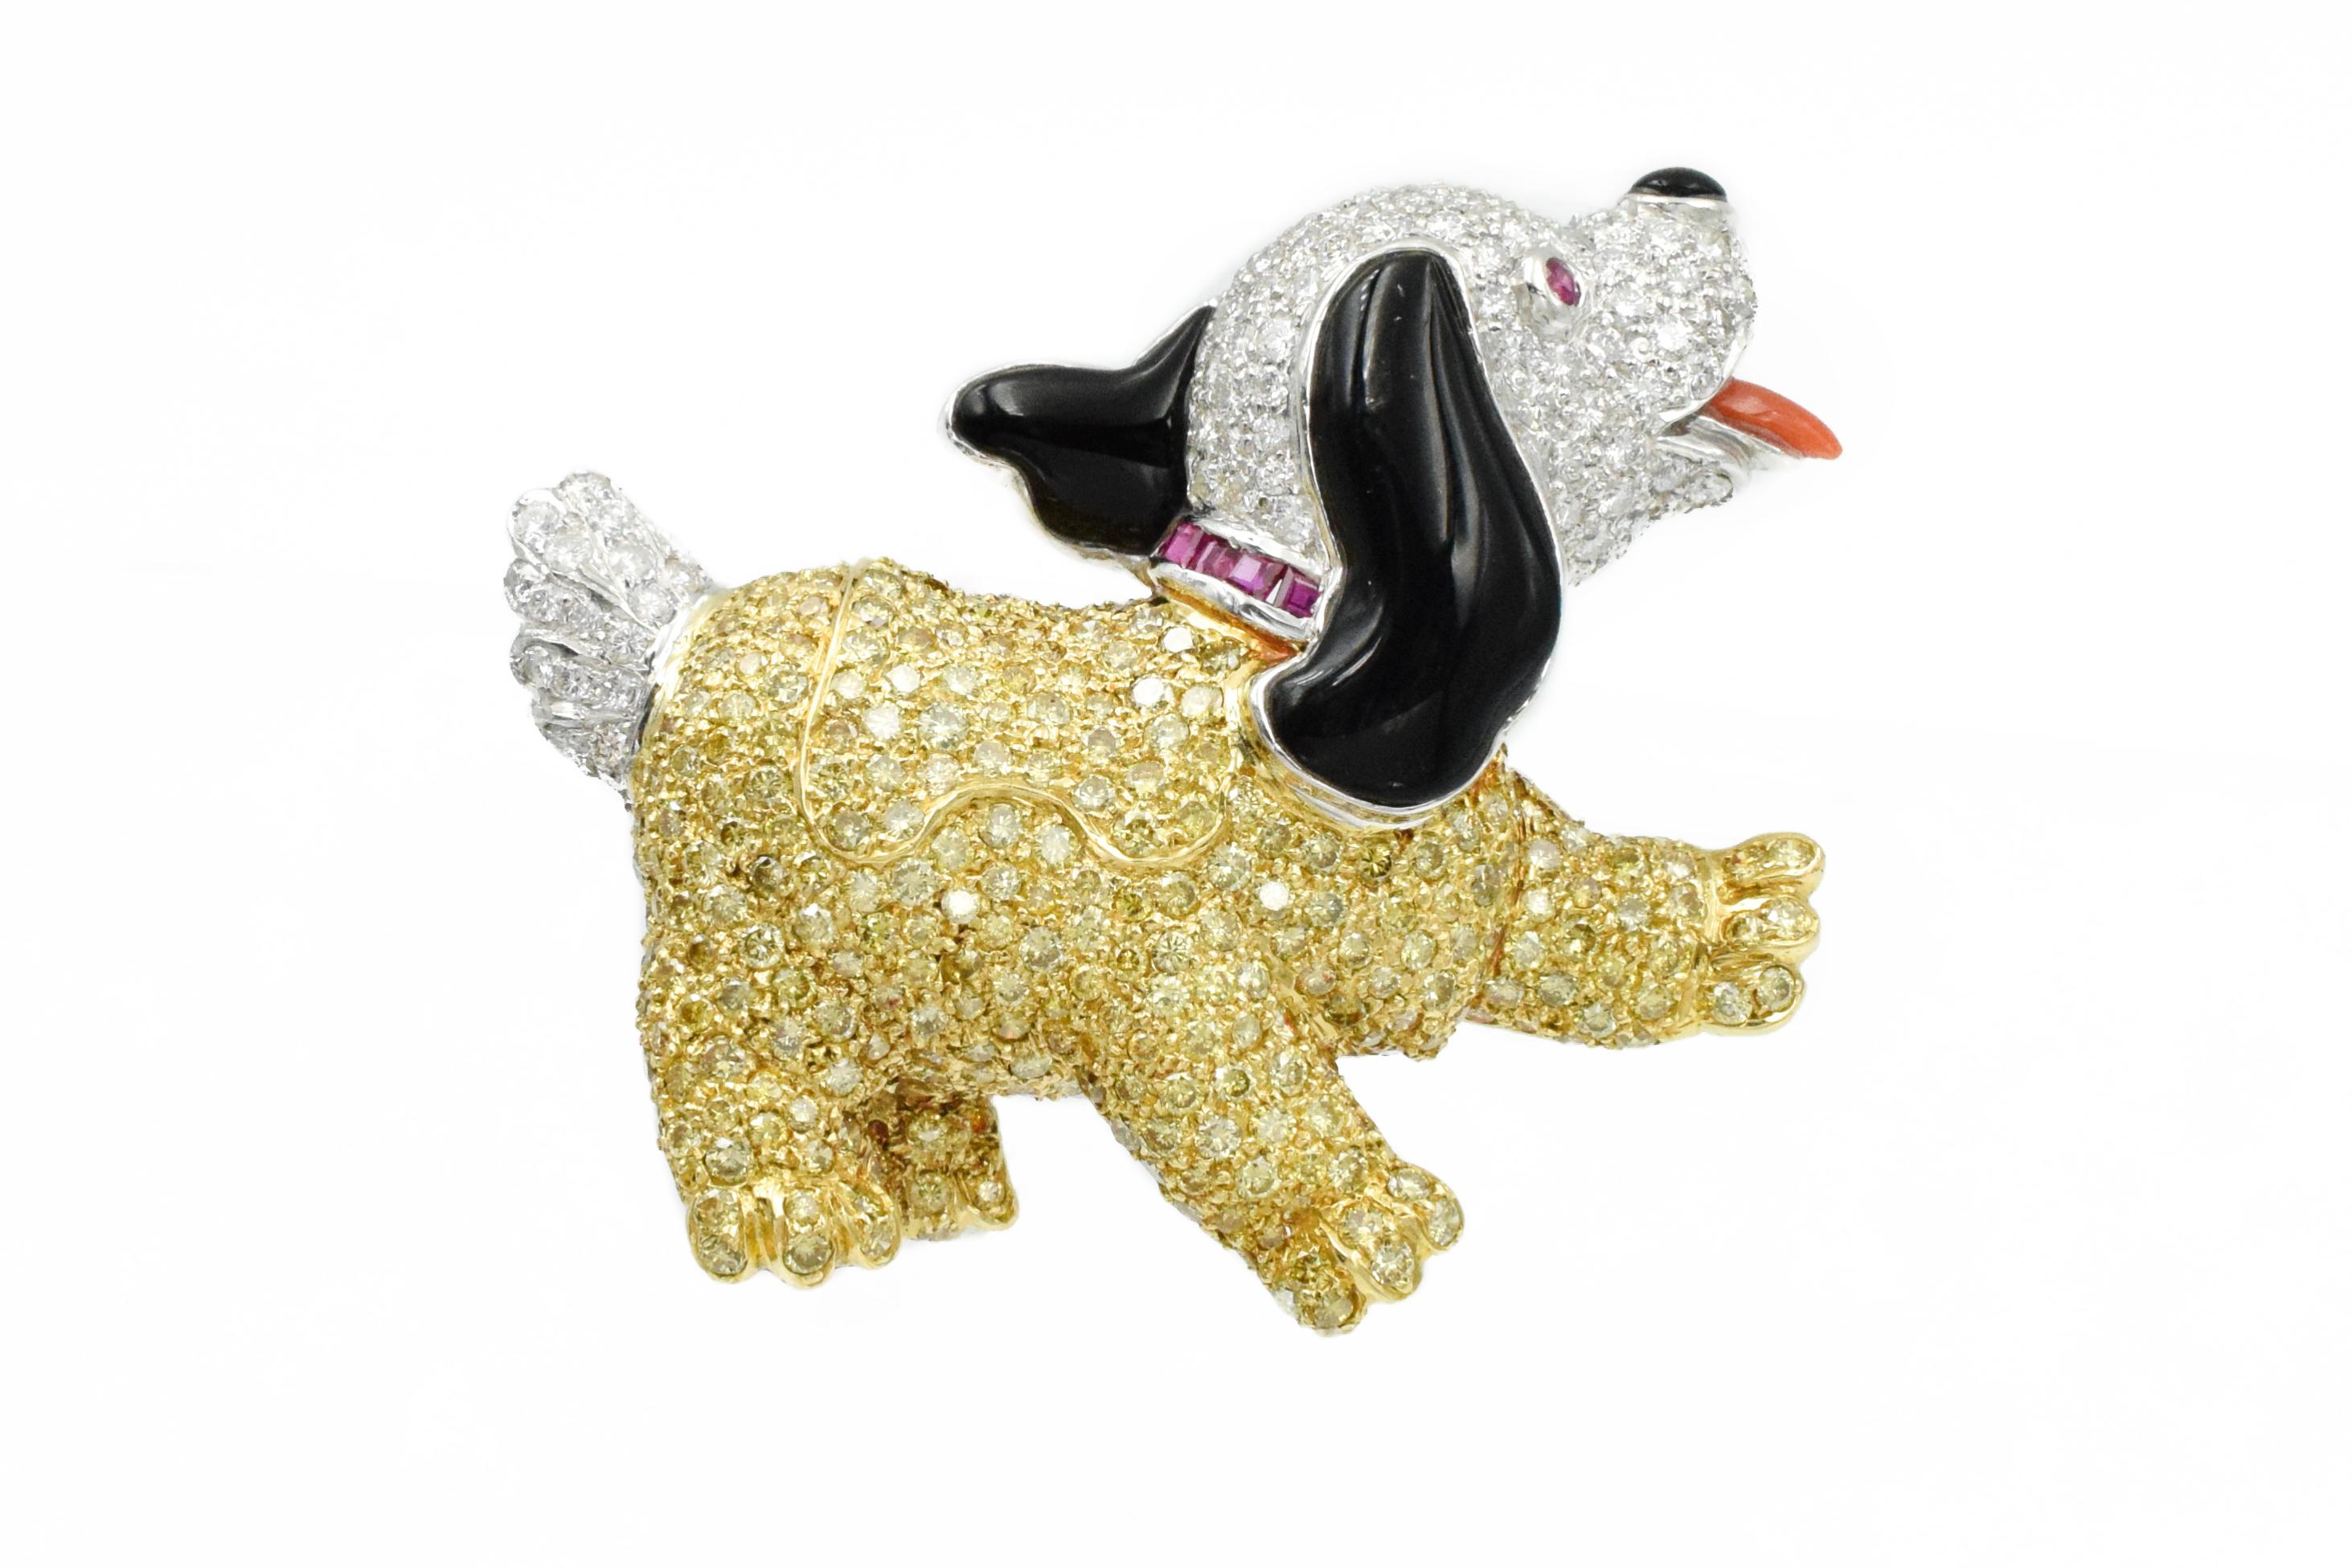 The cutest Cocker Spaniel ever with natural fancy yellow diamond fur!!!
With ruby color eyes and onyx ears.
Estimated total diamond weight is 7.5 carats set in platinum.
Measurements: 2inches x 1.5 inches